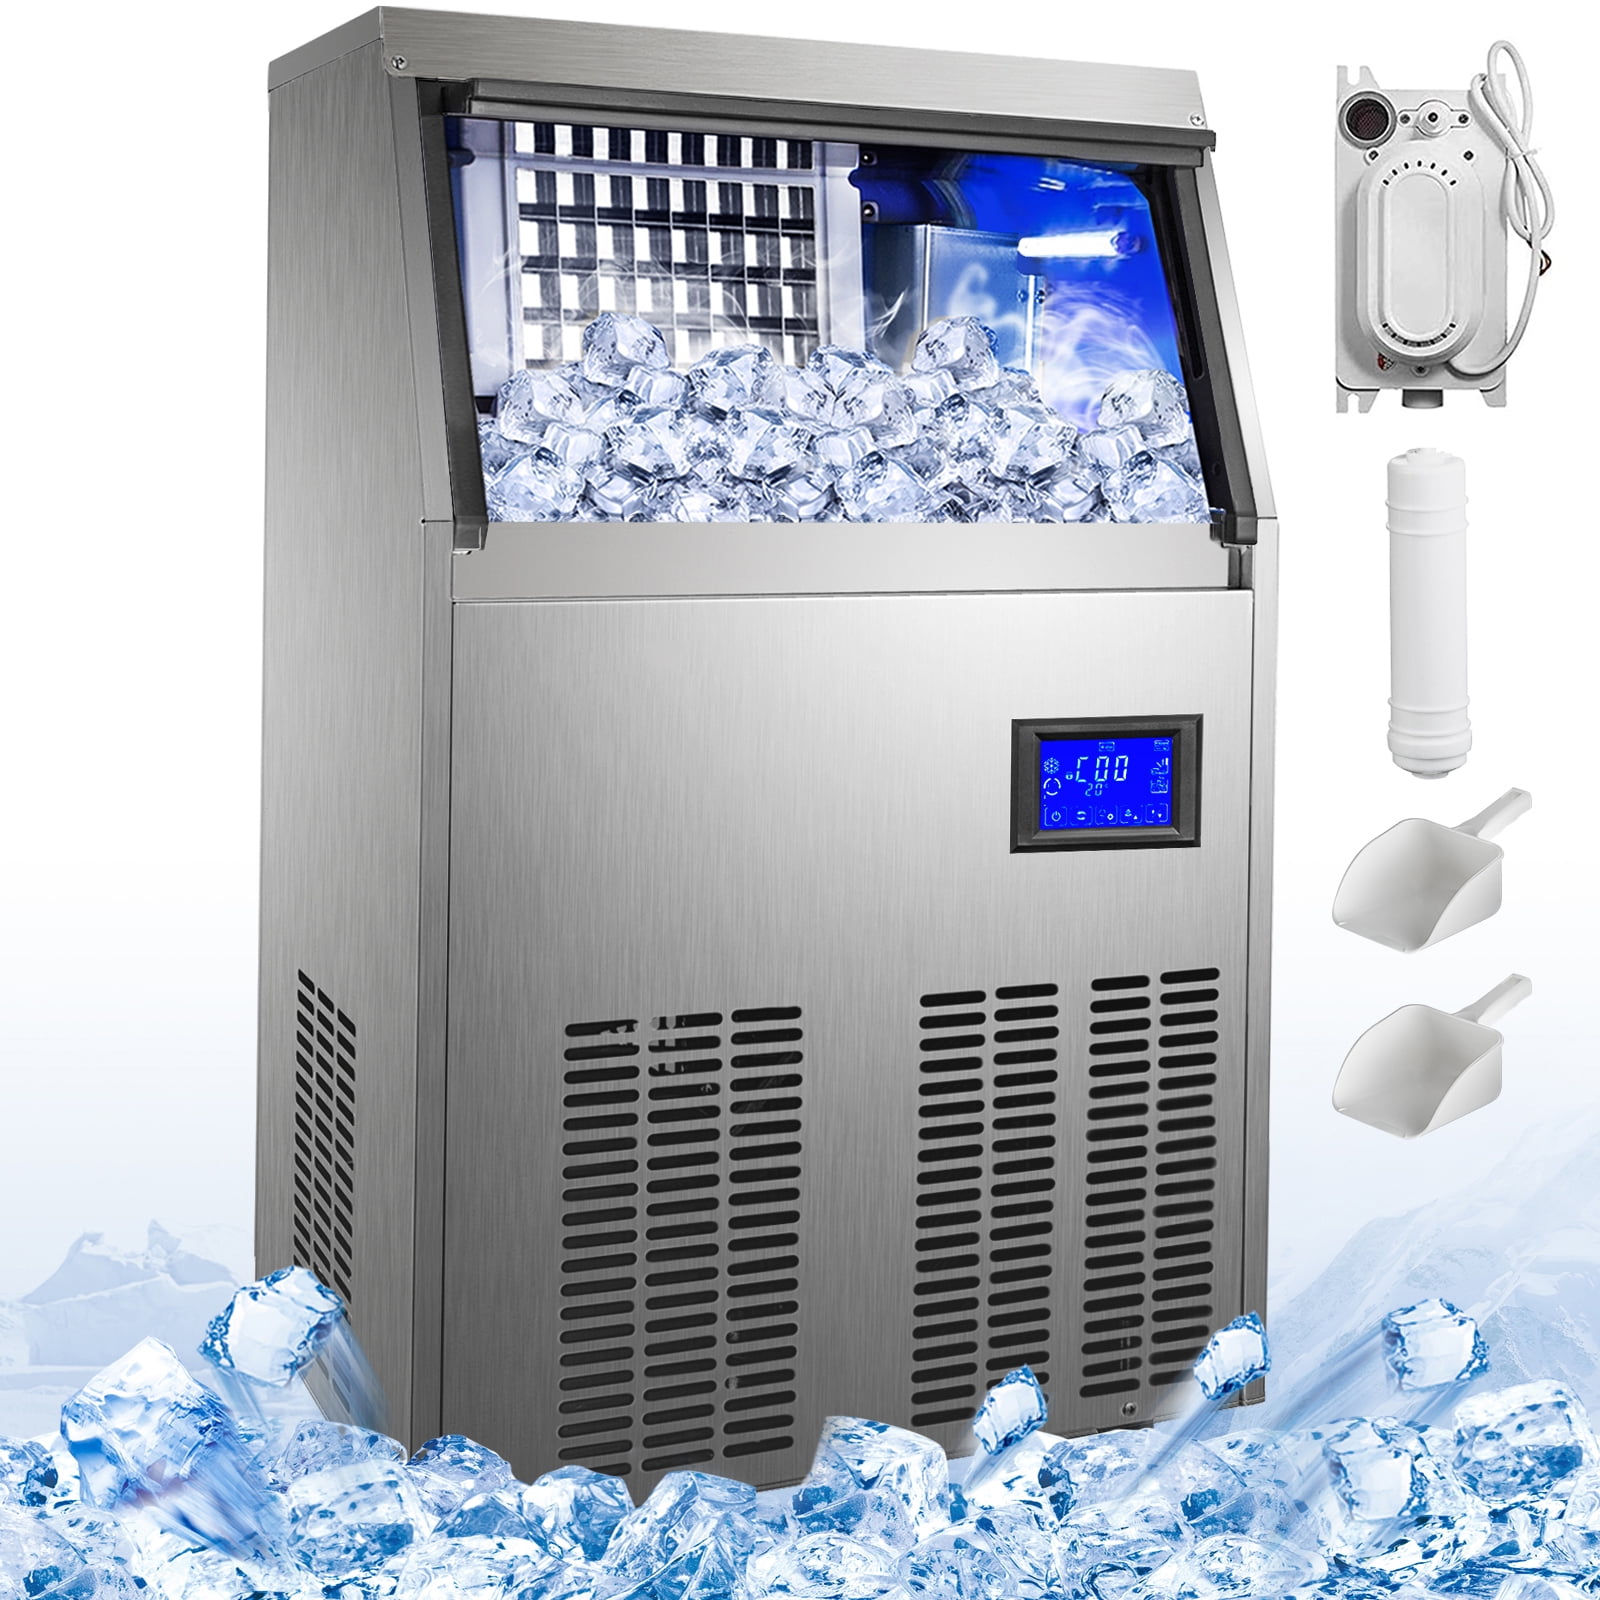 QuickBeat Commercial Ice Cube Maker